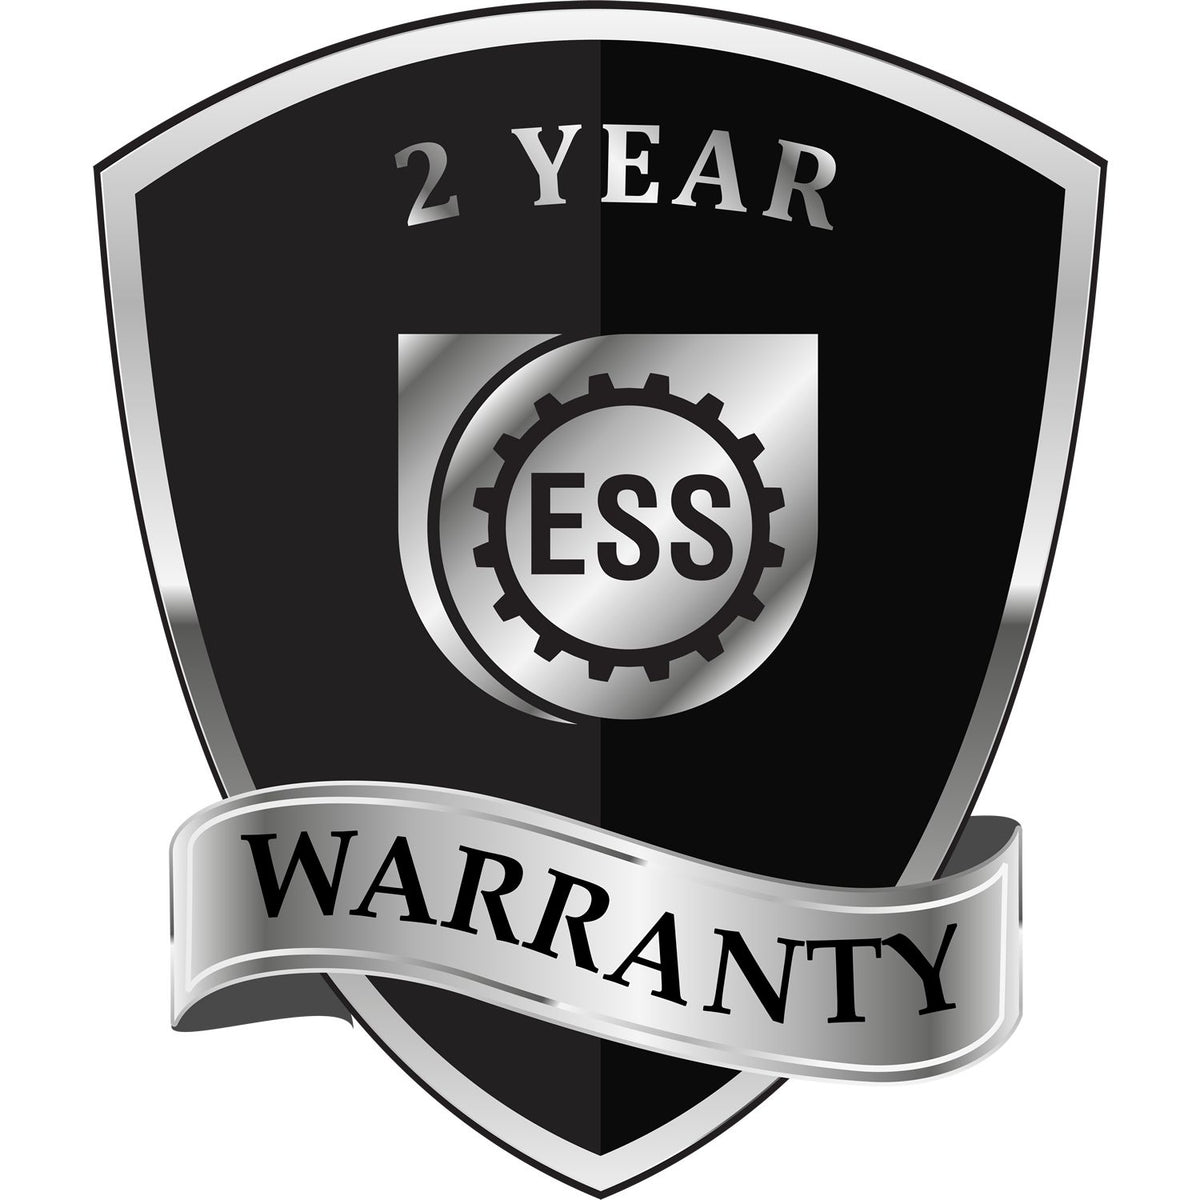 A badge or emblem showing a warranty icon for the Heavy Duty Cast Iron Delaware Land Surveyor Seal Embosser